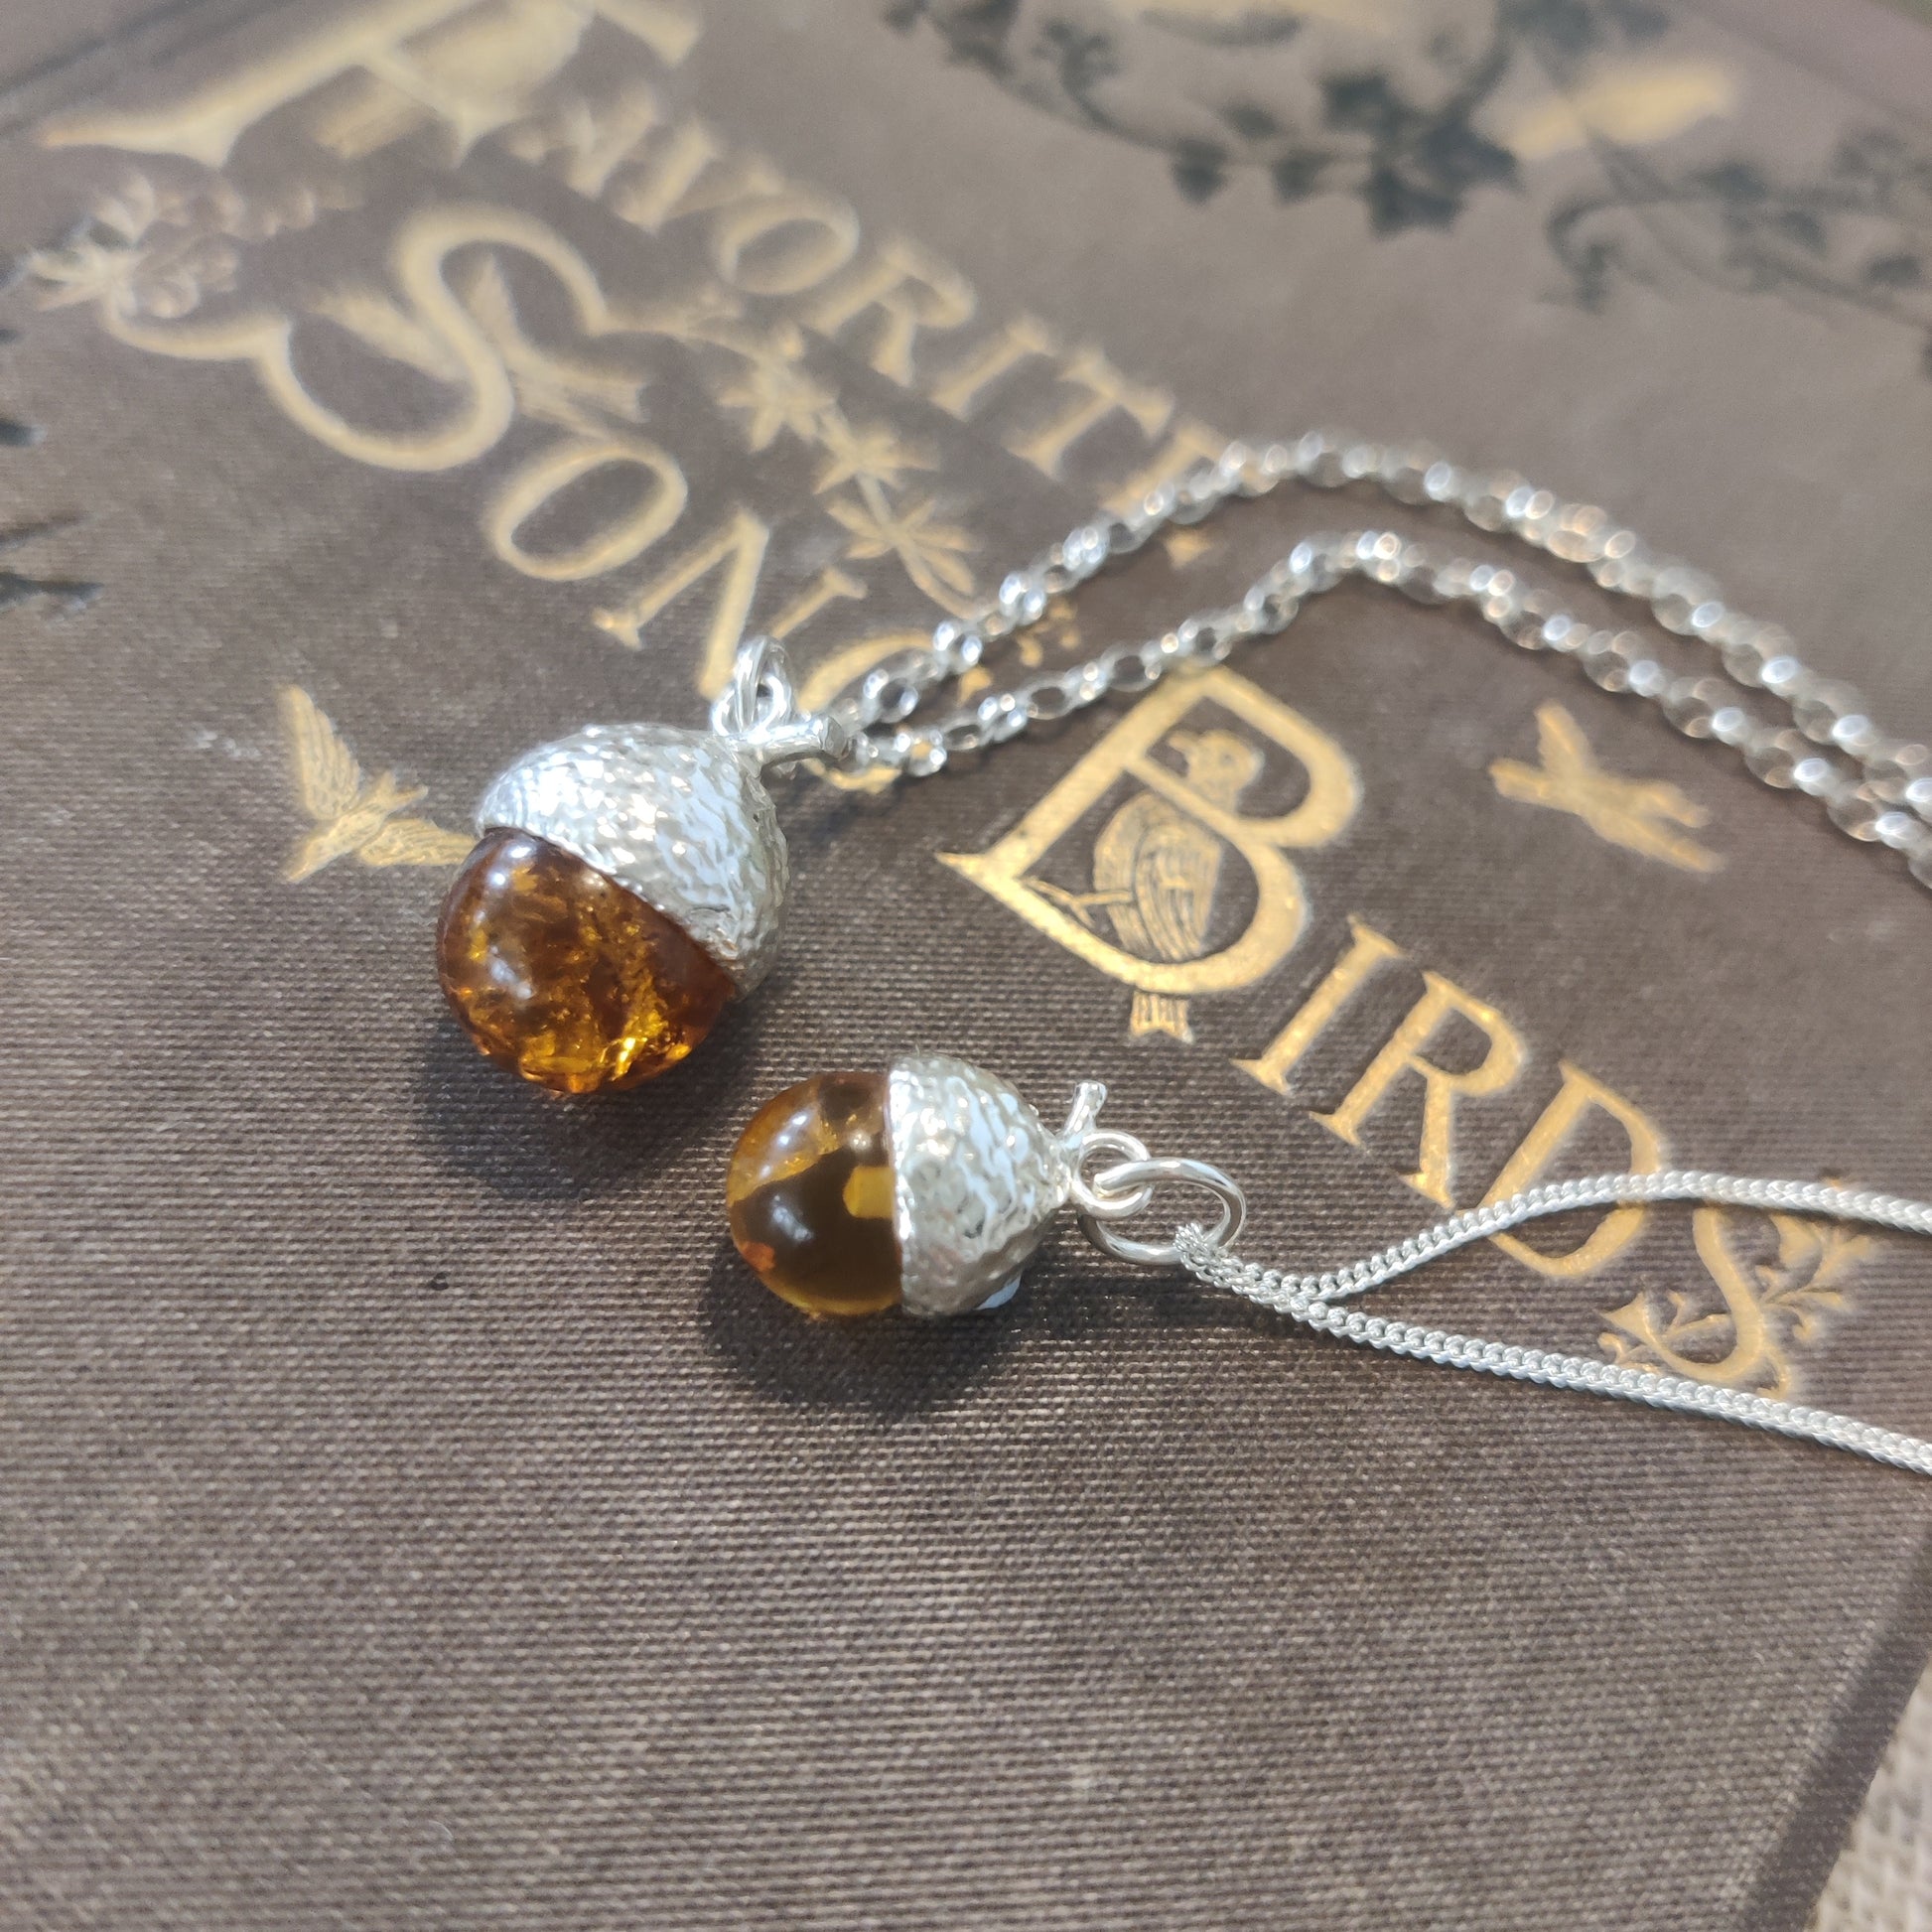 Handcrafted sterling silver and amber pendant necklace.